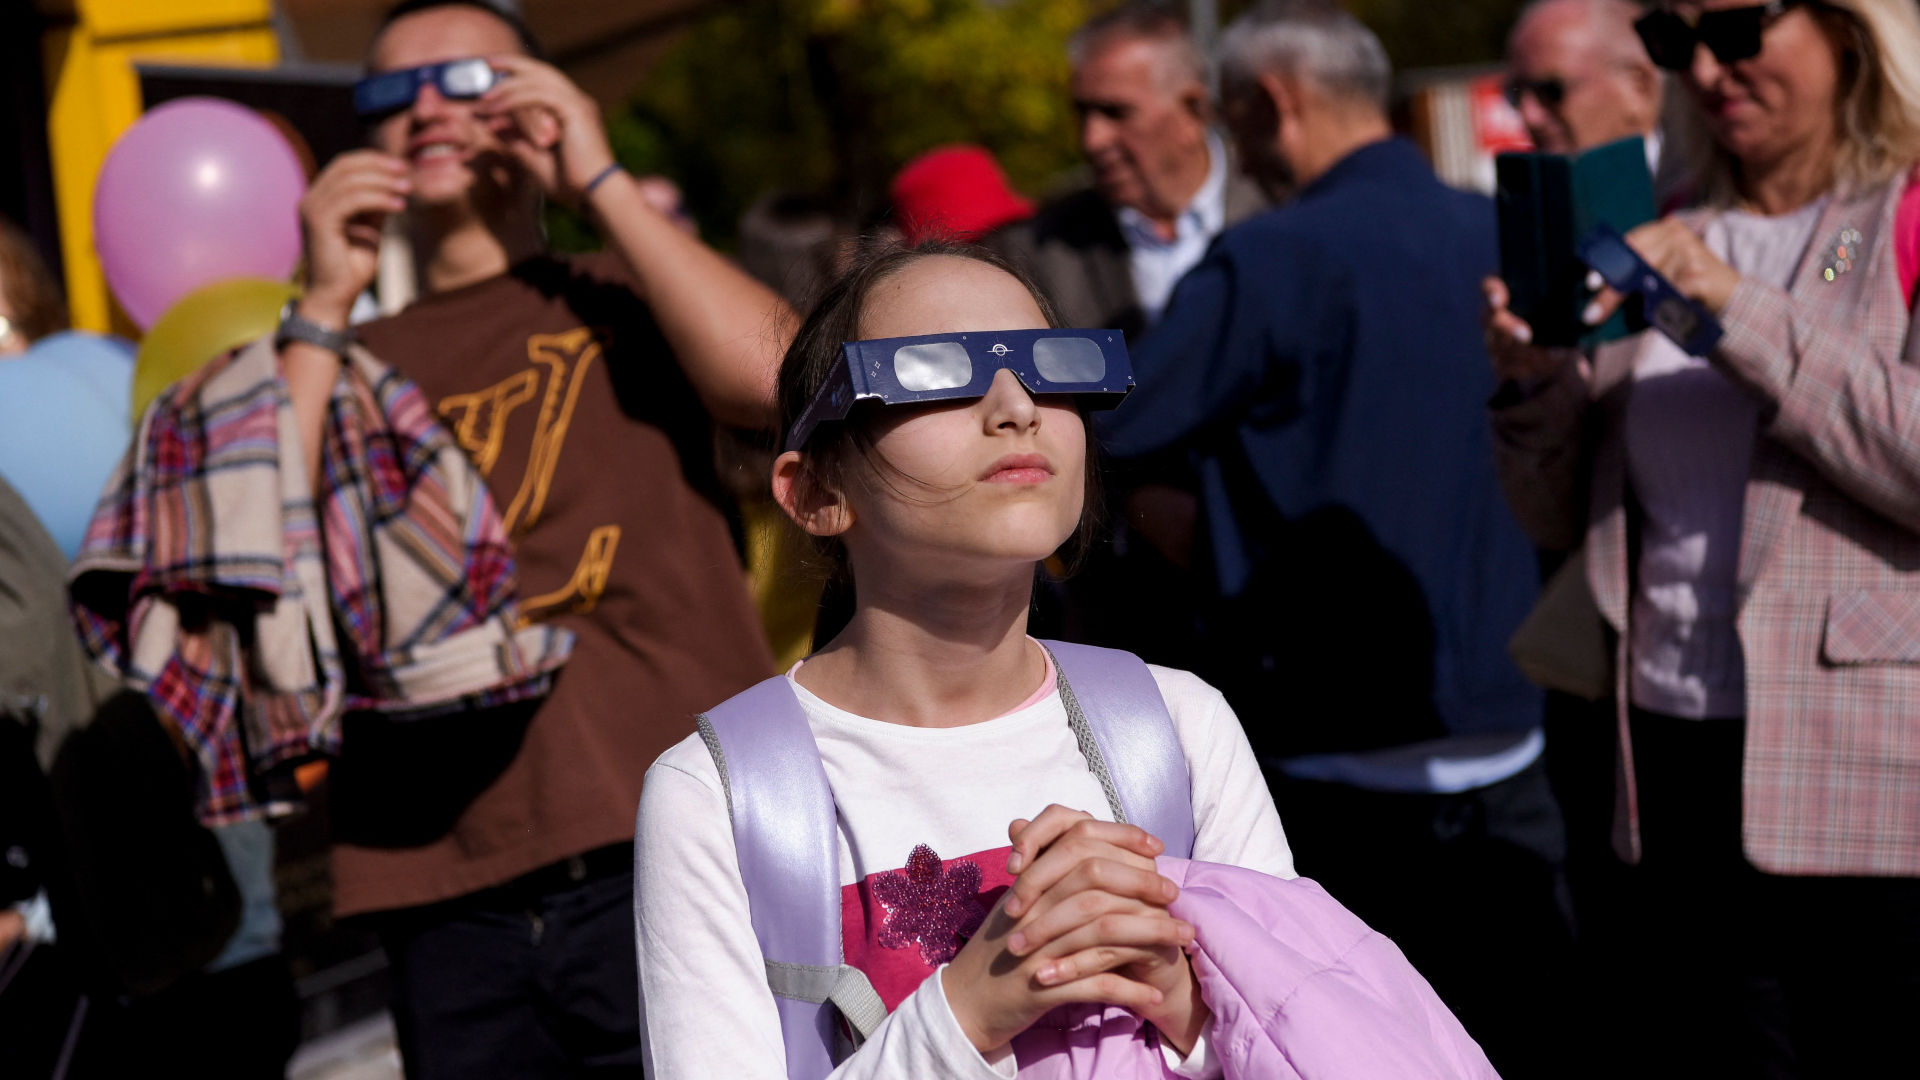 A girl uses protective glasses to watch a partial solar eclipse in Prishtina, Kosovo, on October 25, 2022. In recent years, astronomy enthusiasts have helped drive the development of science infrastructure in the young Balkan country.